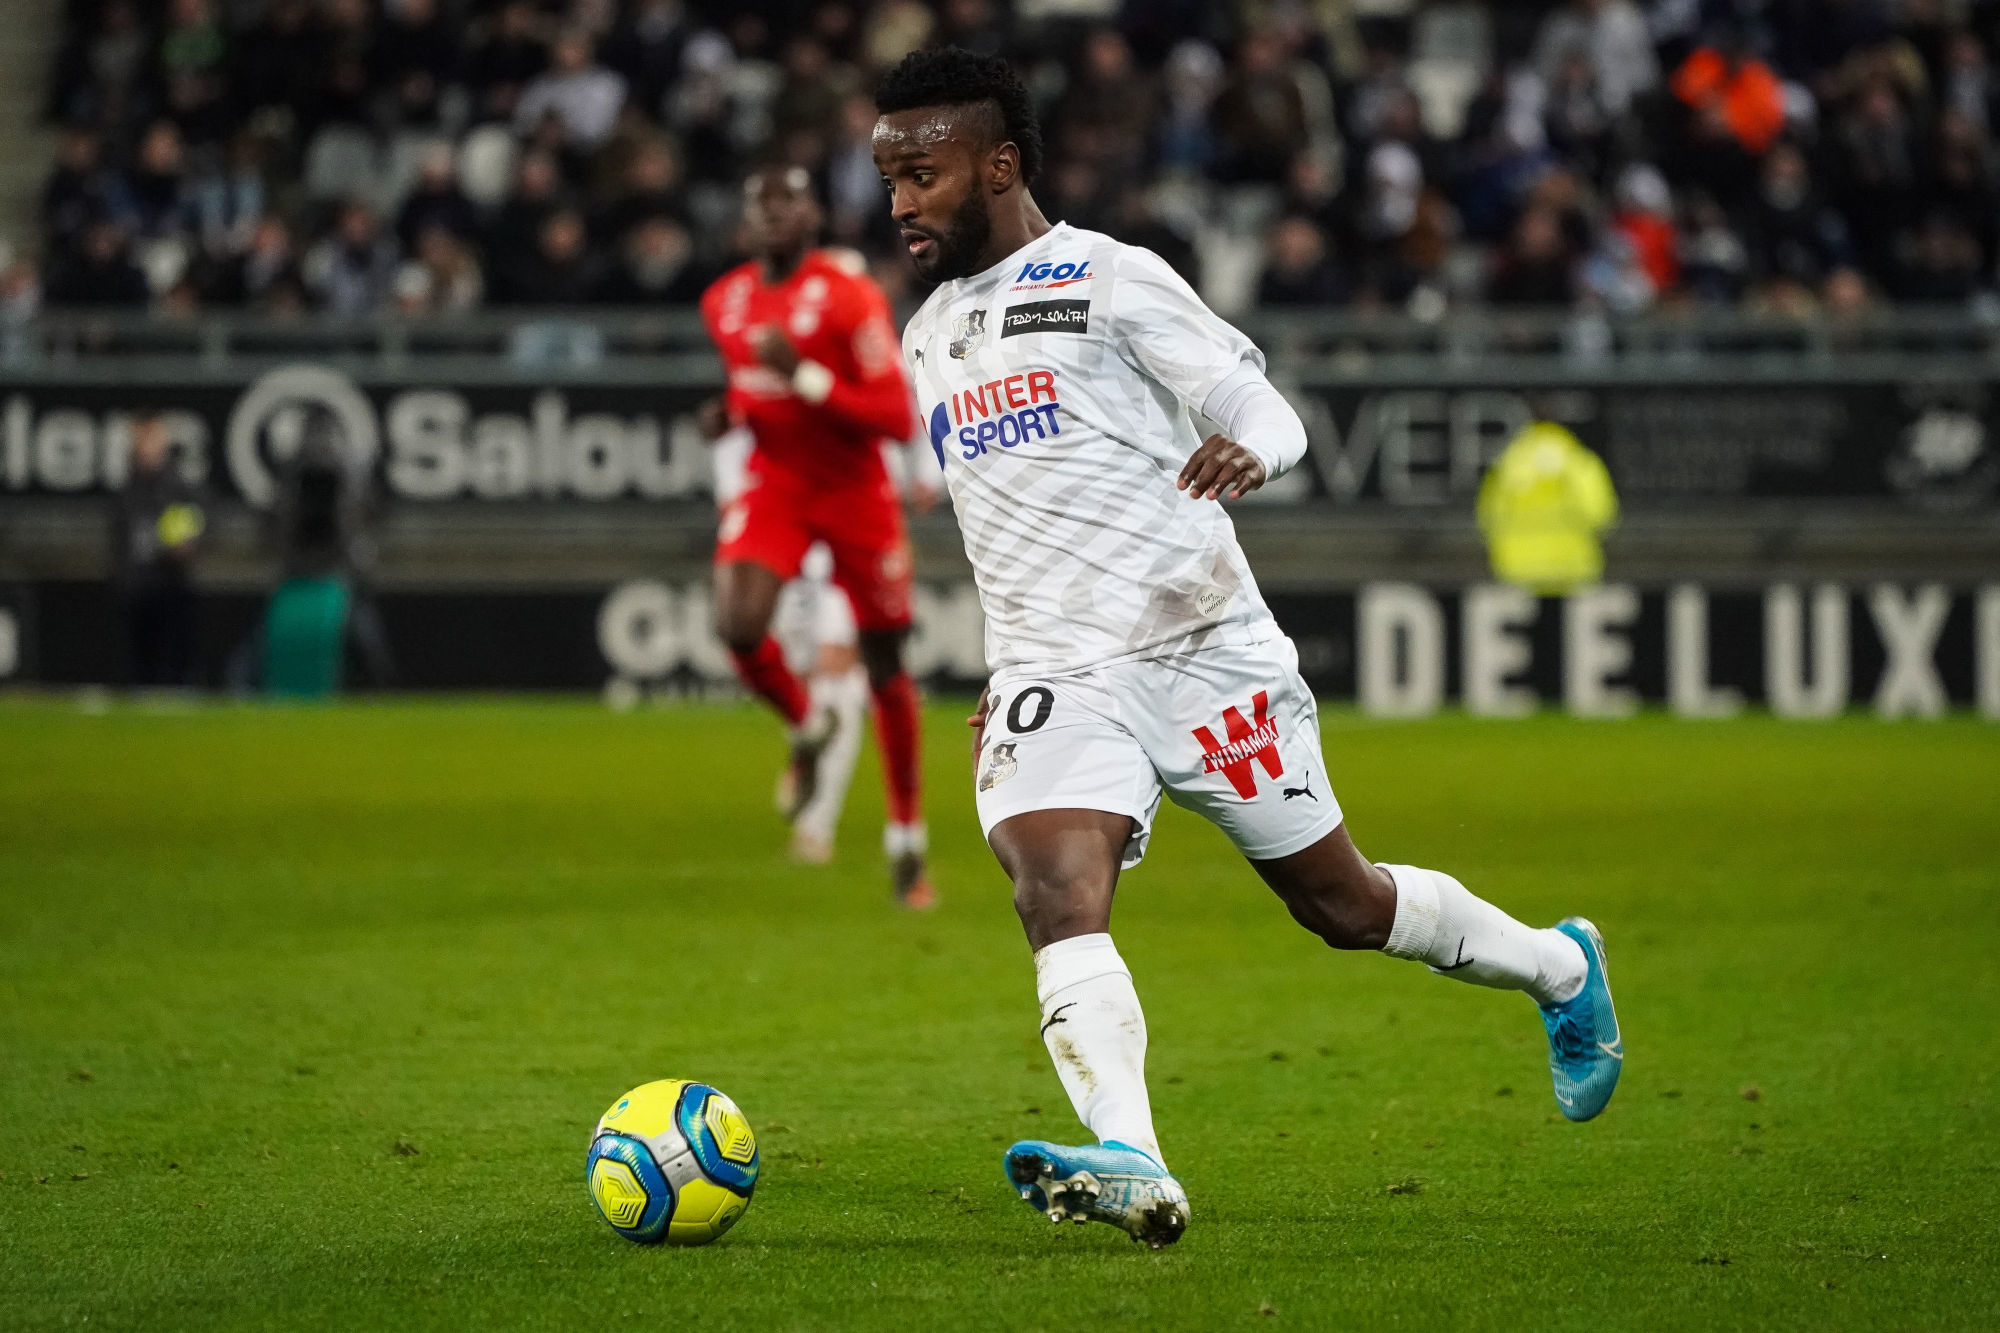 Steven MENDOZA of Amiens SC during the Ligue 1 match between Amiens SC and Montpellier HSC at Stade Crédit Agricole La Licorne on January 11, 2020 in Amiens, France. (Photo by Pierre Costabadie/Icon Sport) - Steven MENDOZA - Stade de la Licorne - Amiens (France)